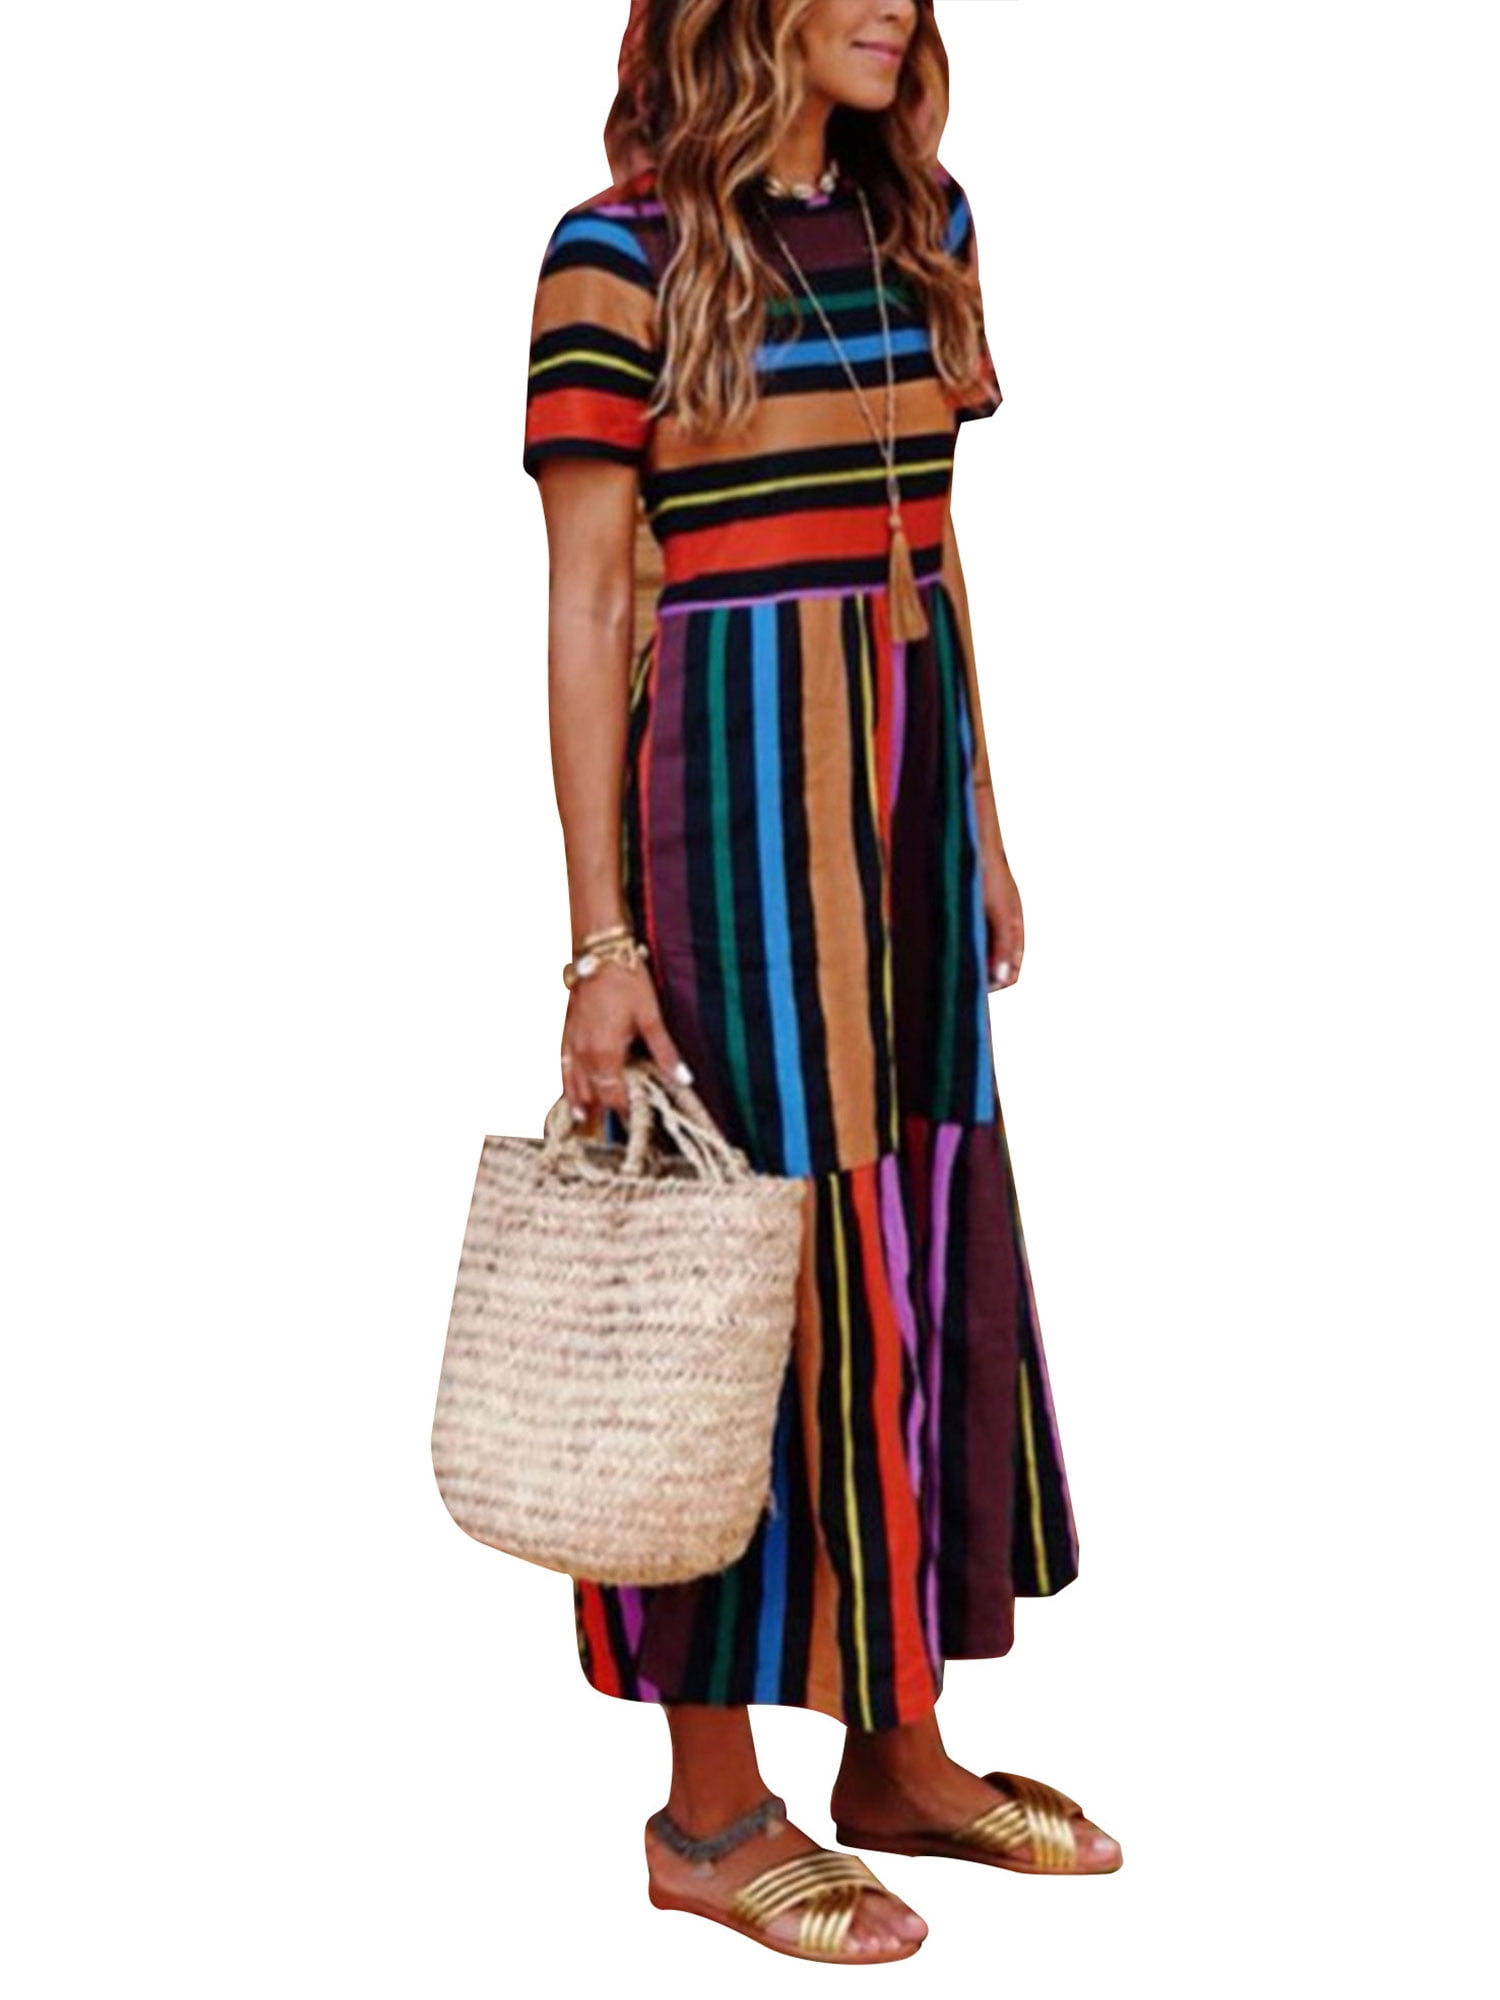 Stirpes Dress for Women's Summer Boho Casual Colorful Short Slleve Long  Maxi Beach Dress Evening Party Cocktail Holiday Sundress - Walmart.com